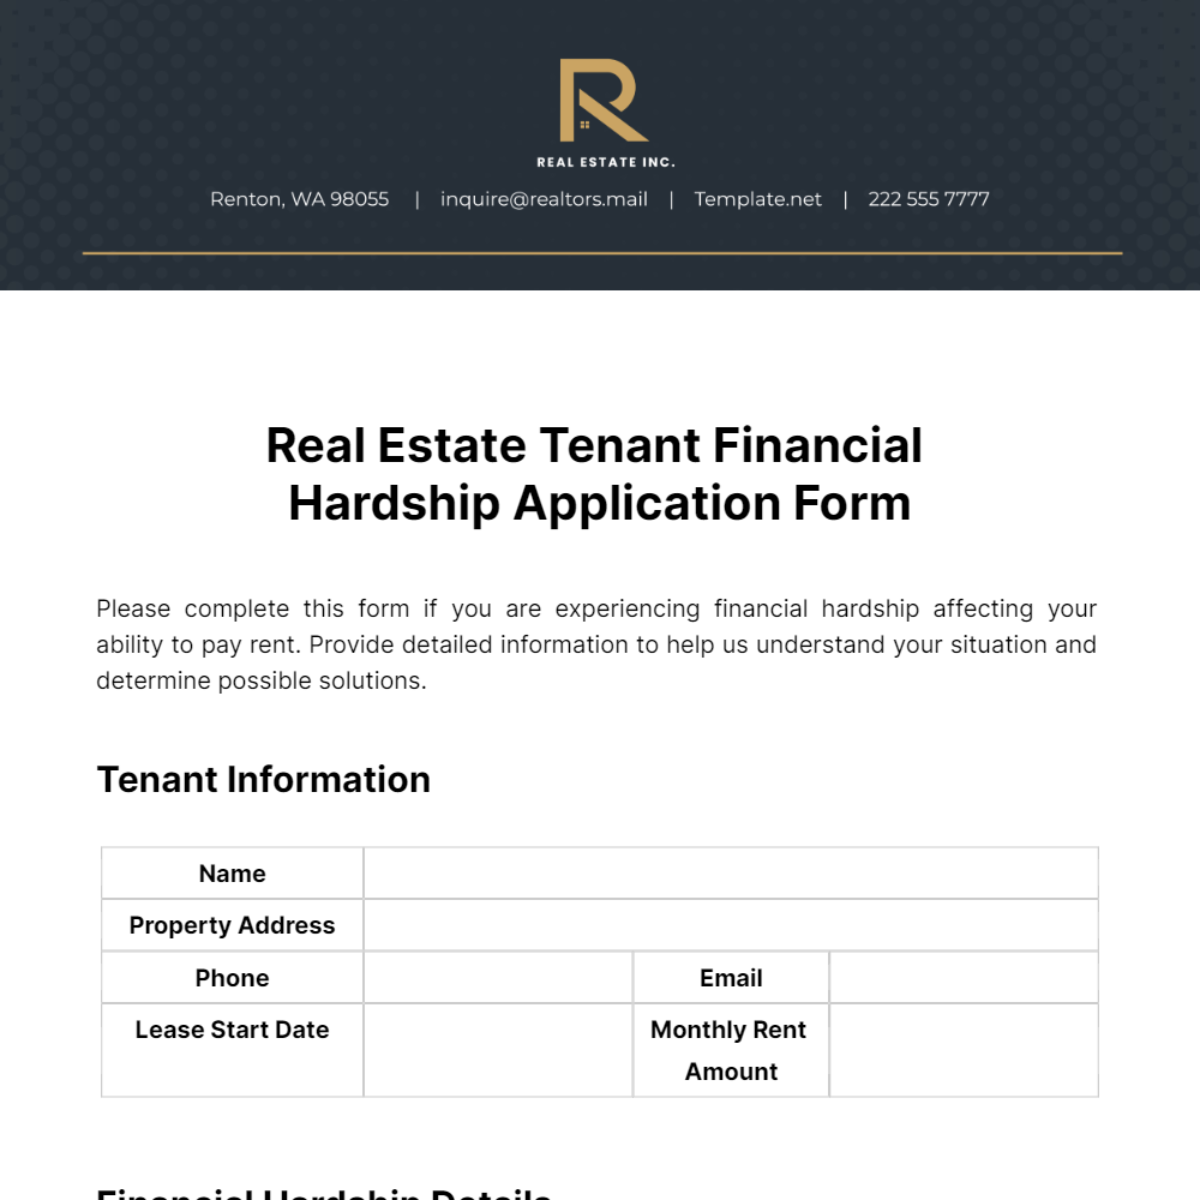 Real Estate Tenant Financial Hardship Application Form Template